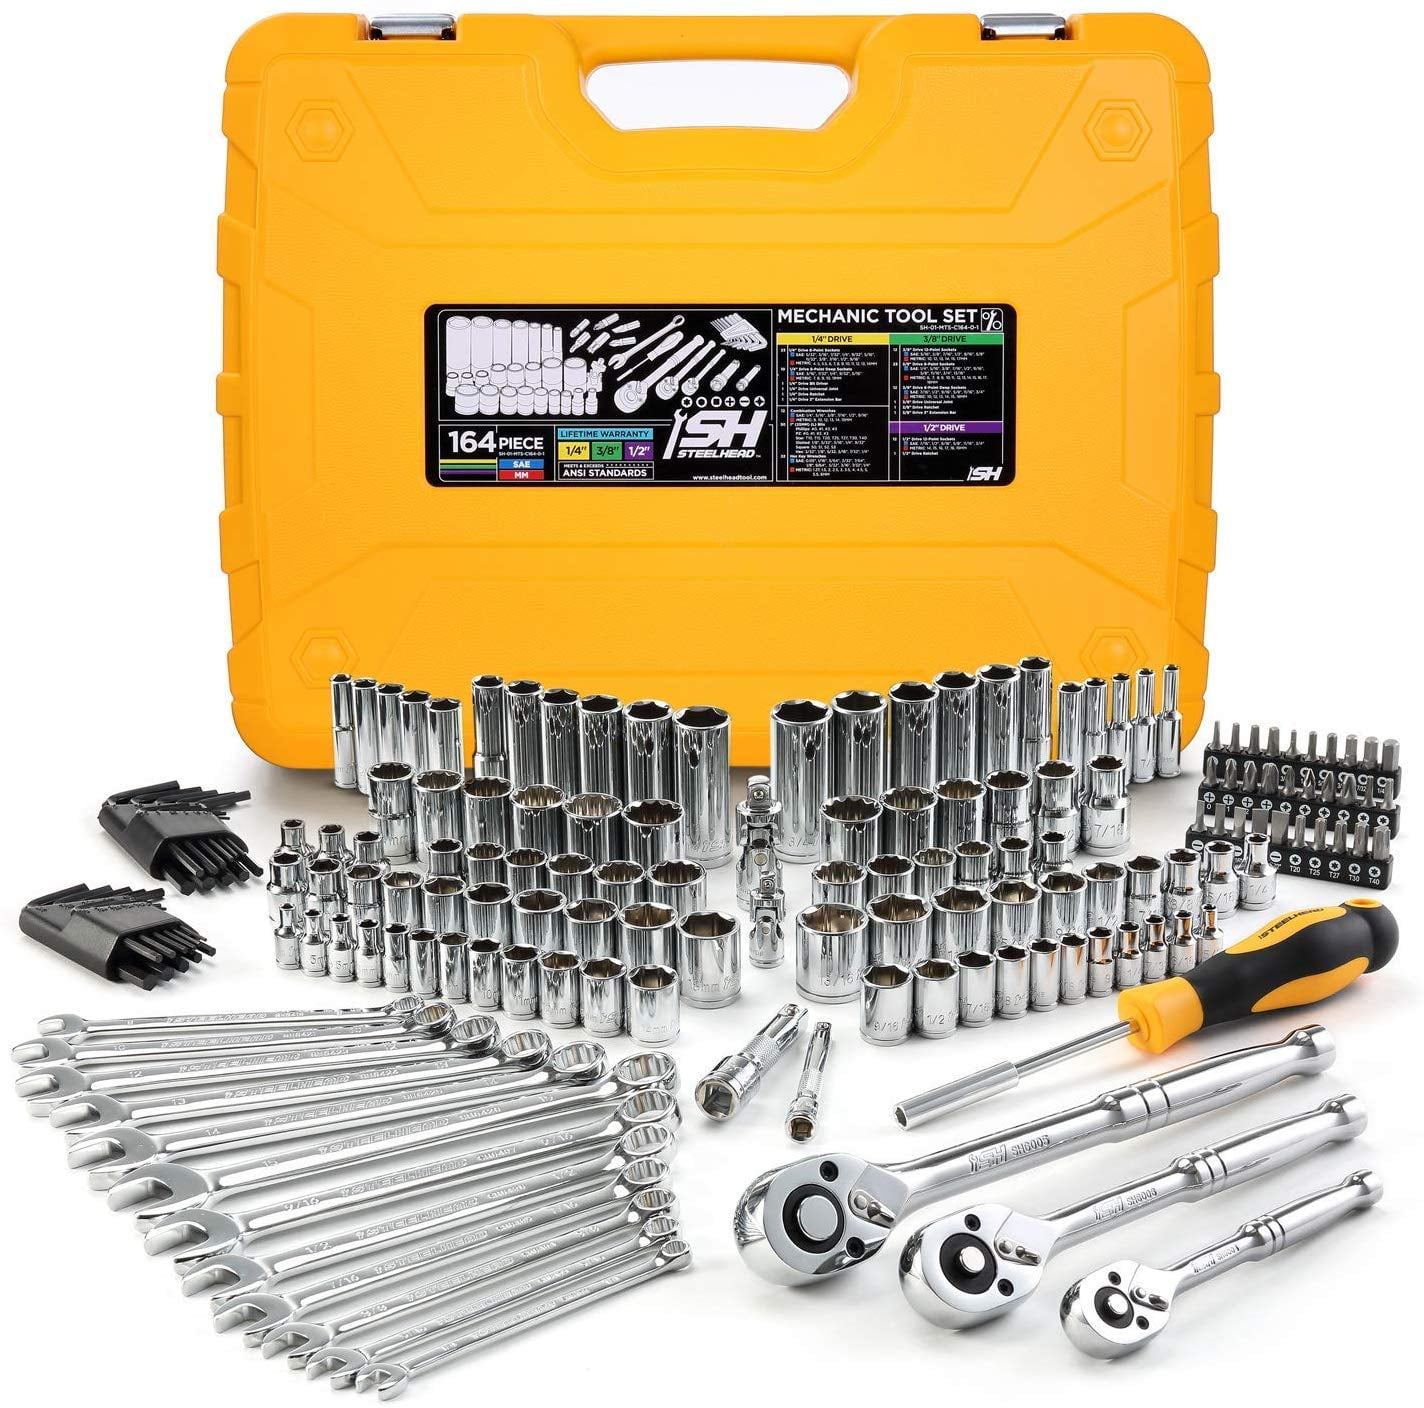 STEELHEAD 164-Piece Mechanics Tool & Socket Set (ANSI), SAE & MM,  1/4?,3/8?,1/2? 72-Tooth Ratchet, 6 & 12 Point Sockets, Combination & Hex  Wrenches, 